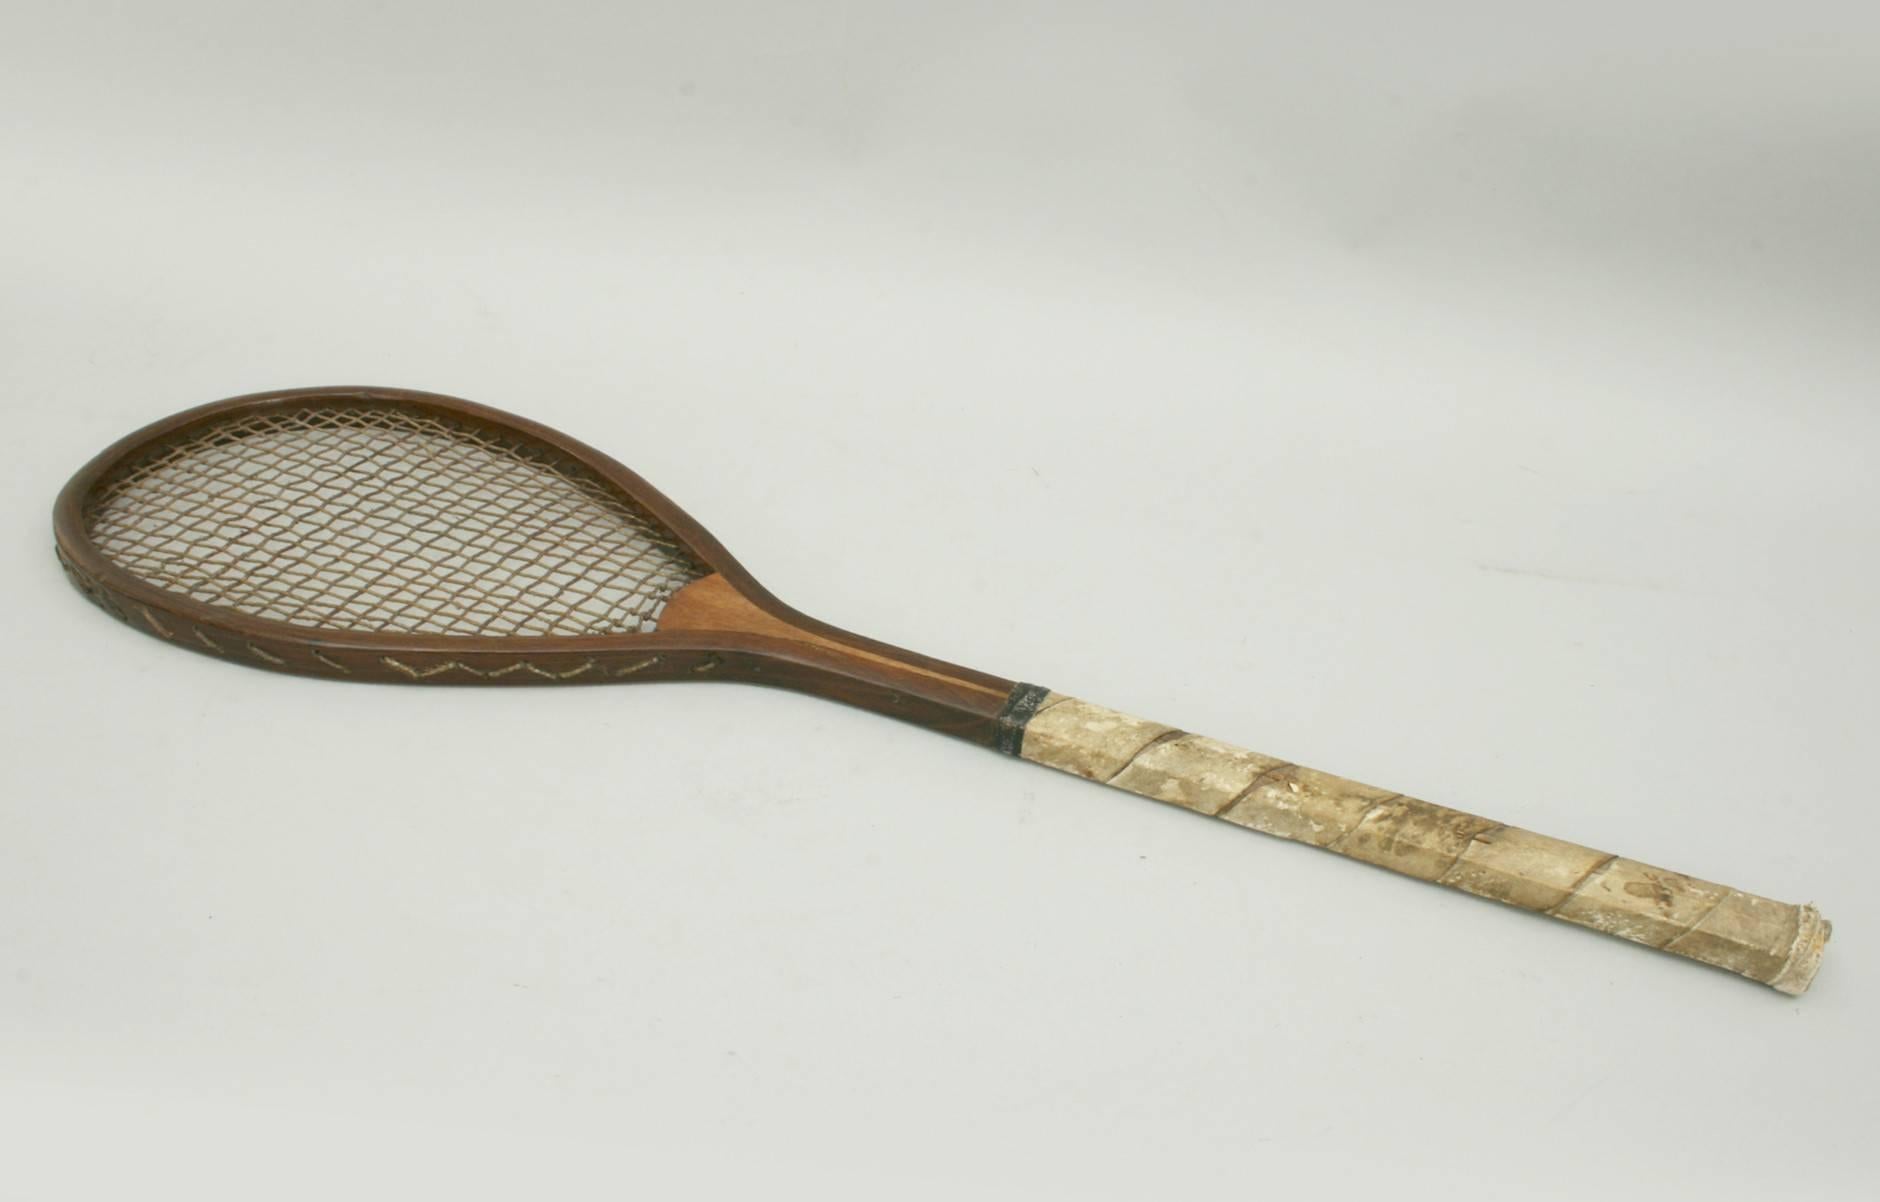 Early lawn tennis racket.
This racket has all the signs of an early lawn tennis racket even though it is not a lopsided racket (tilt head). It is light and delicate like a Sphairistike racket, the stringing looks original and the handle has a white